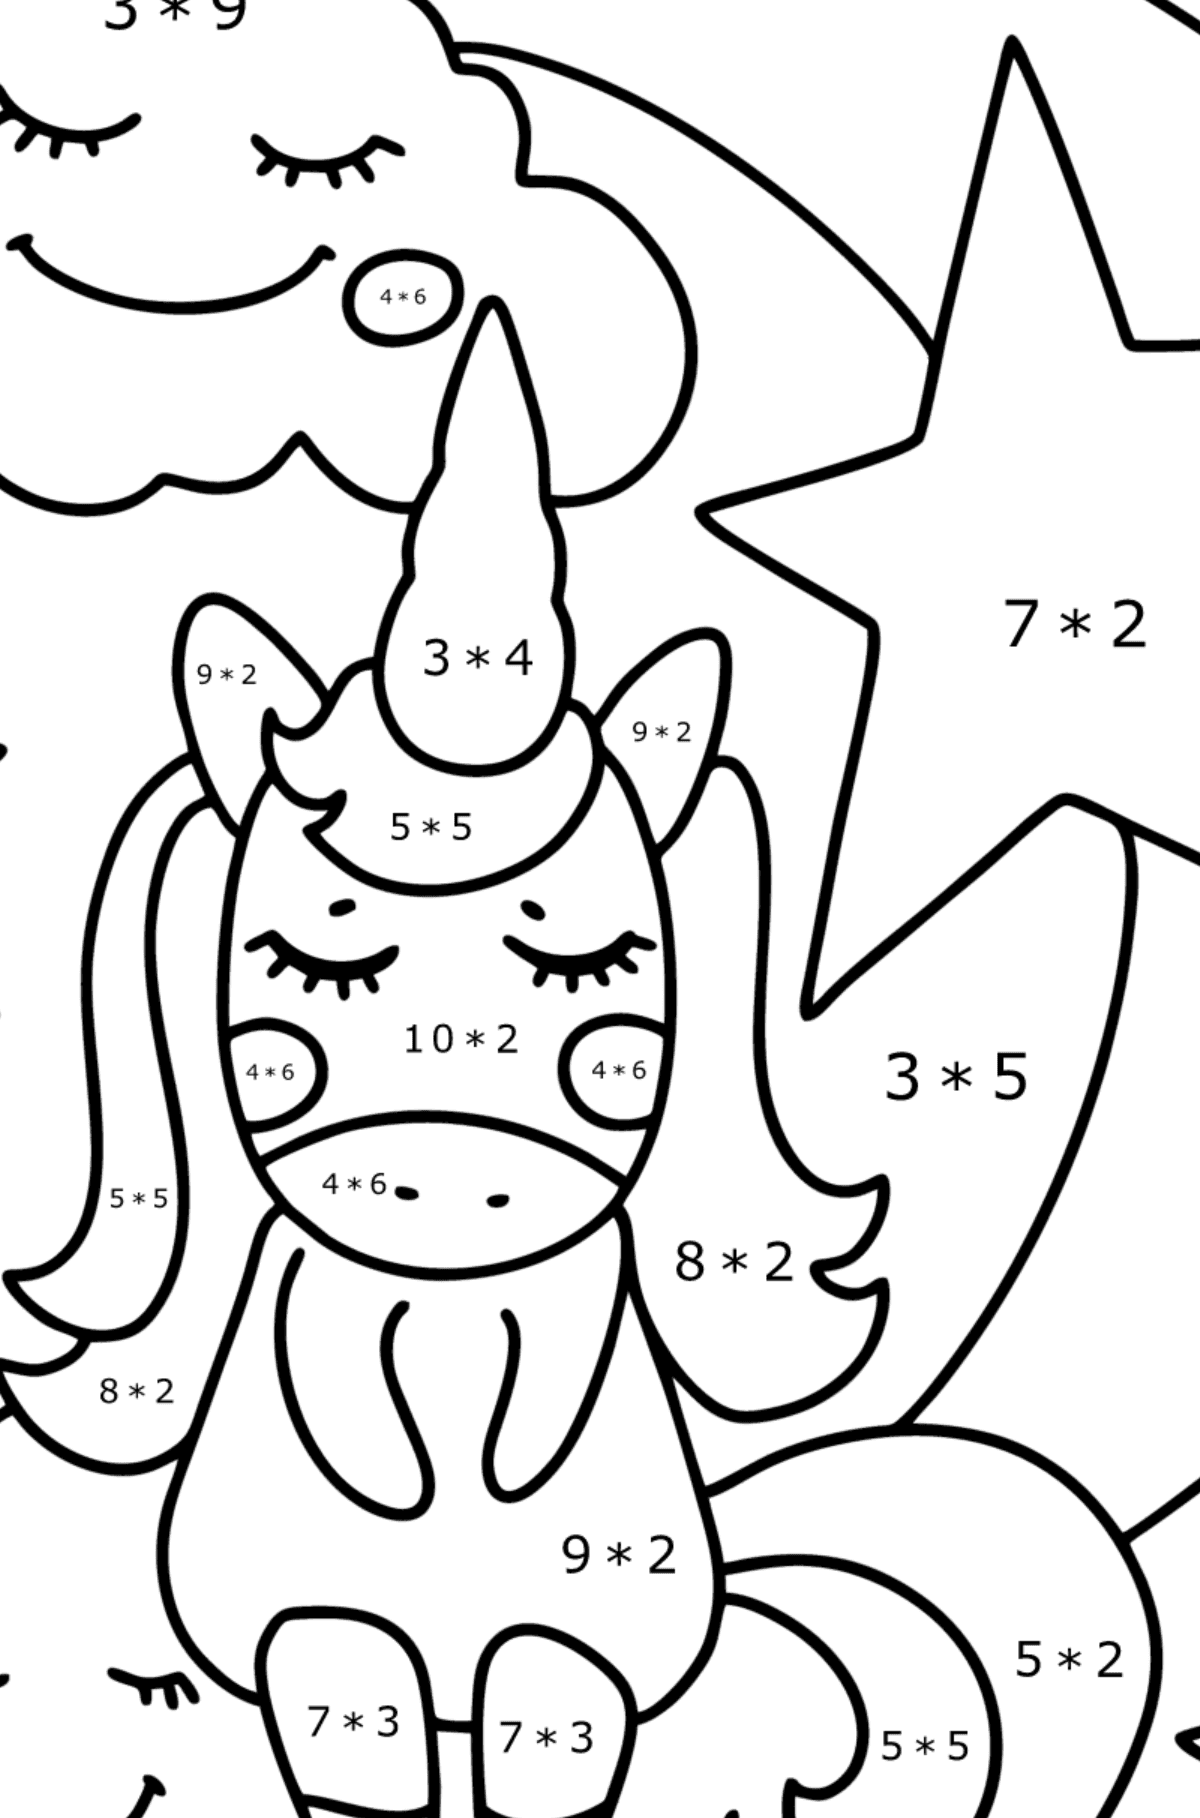 Star unicorn coloring page - Math Coloring - Multiplication for Kids